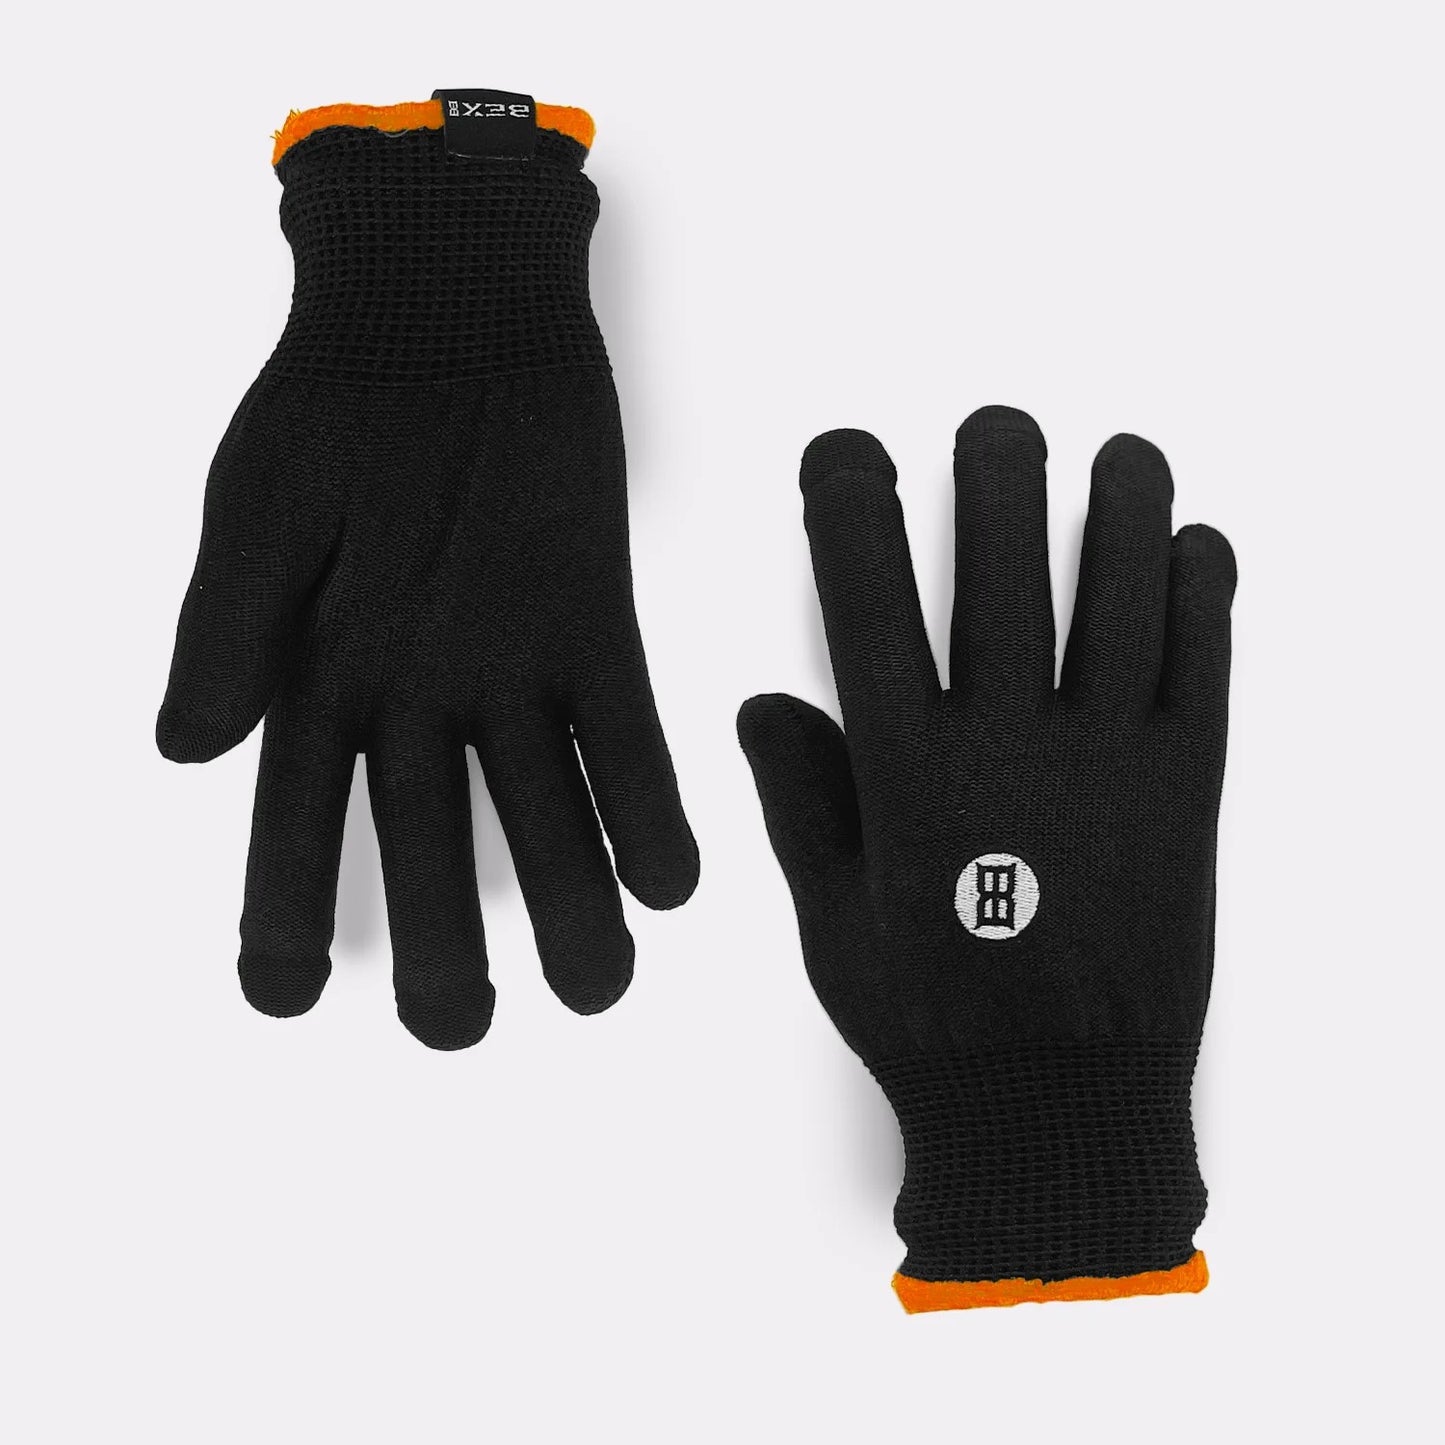 The Gant Bex 3-Pack Rope Glove(Youth/Adult)